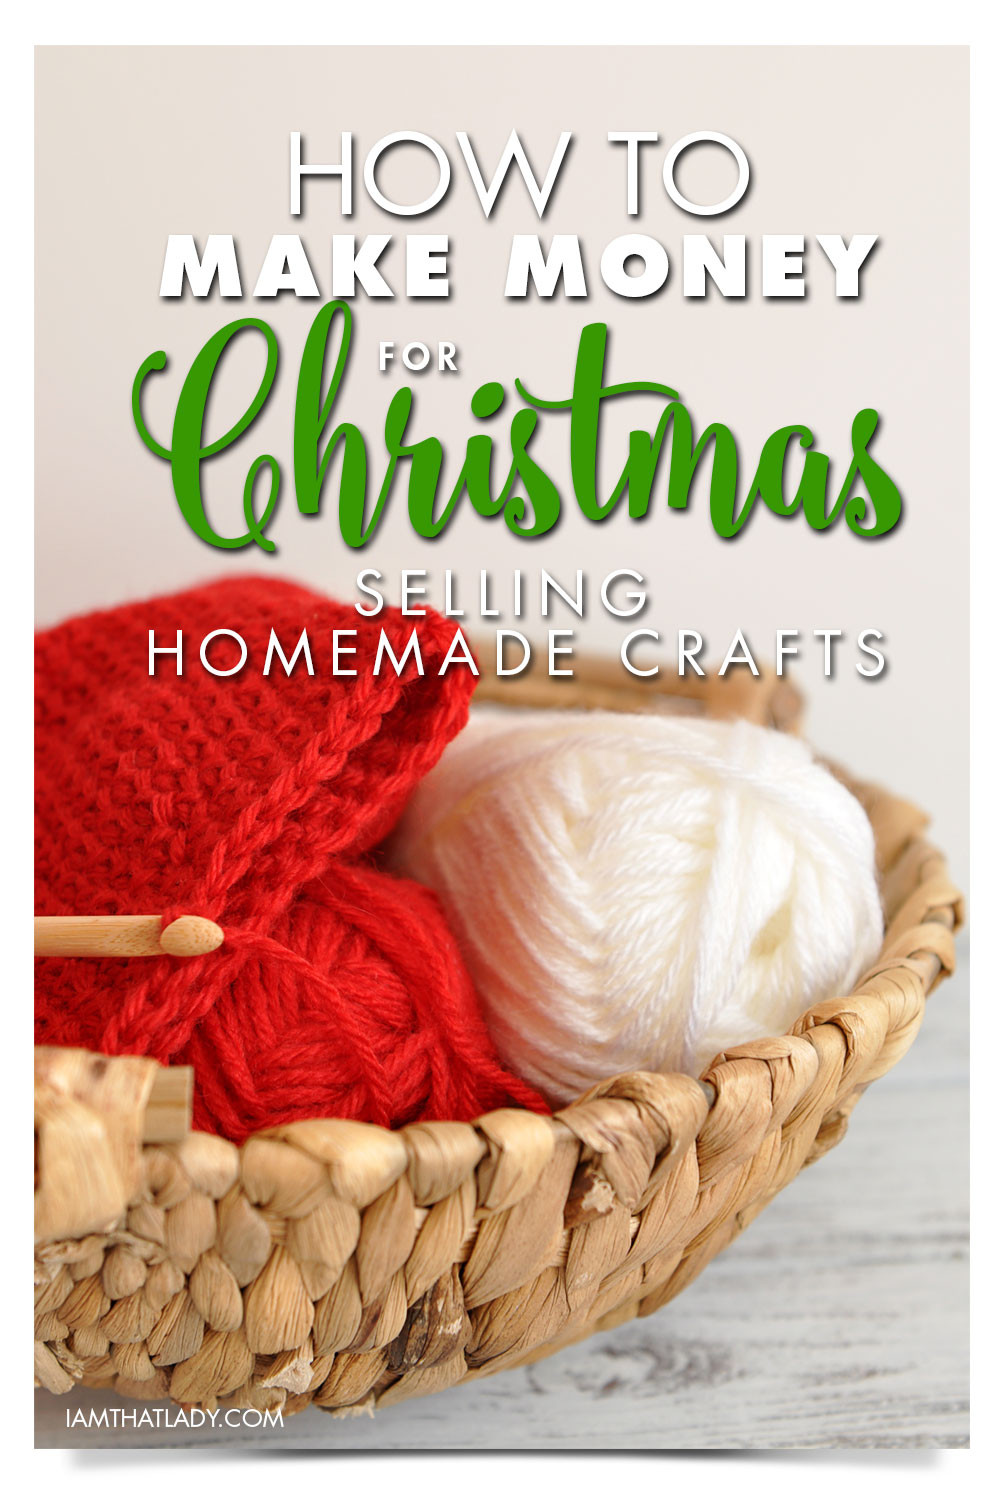 Christmas Crafts To Make And Sell Pinterest
 How to Make Money with Homemade Christmas Crafts